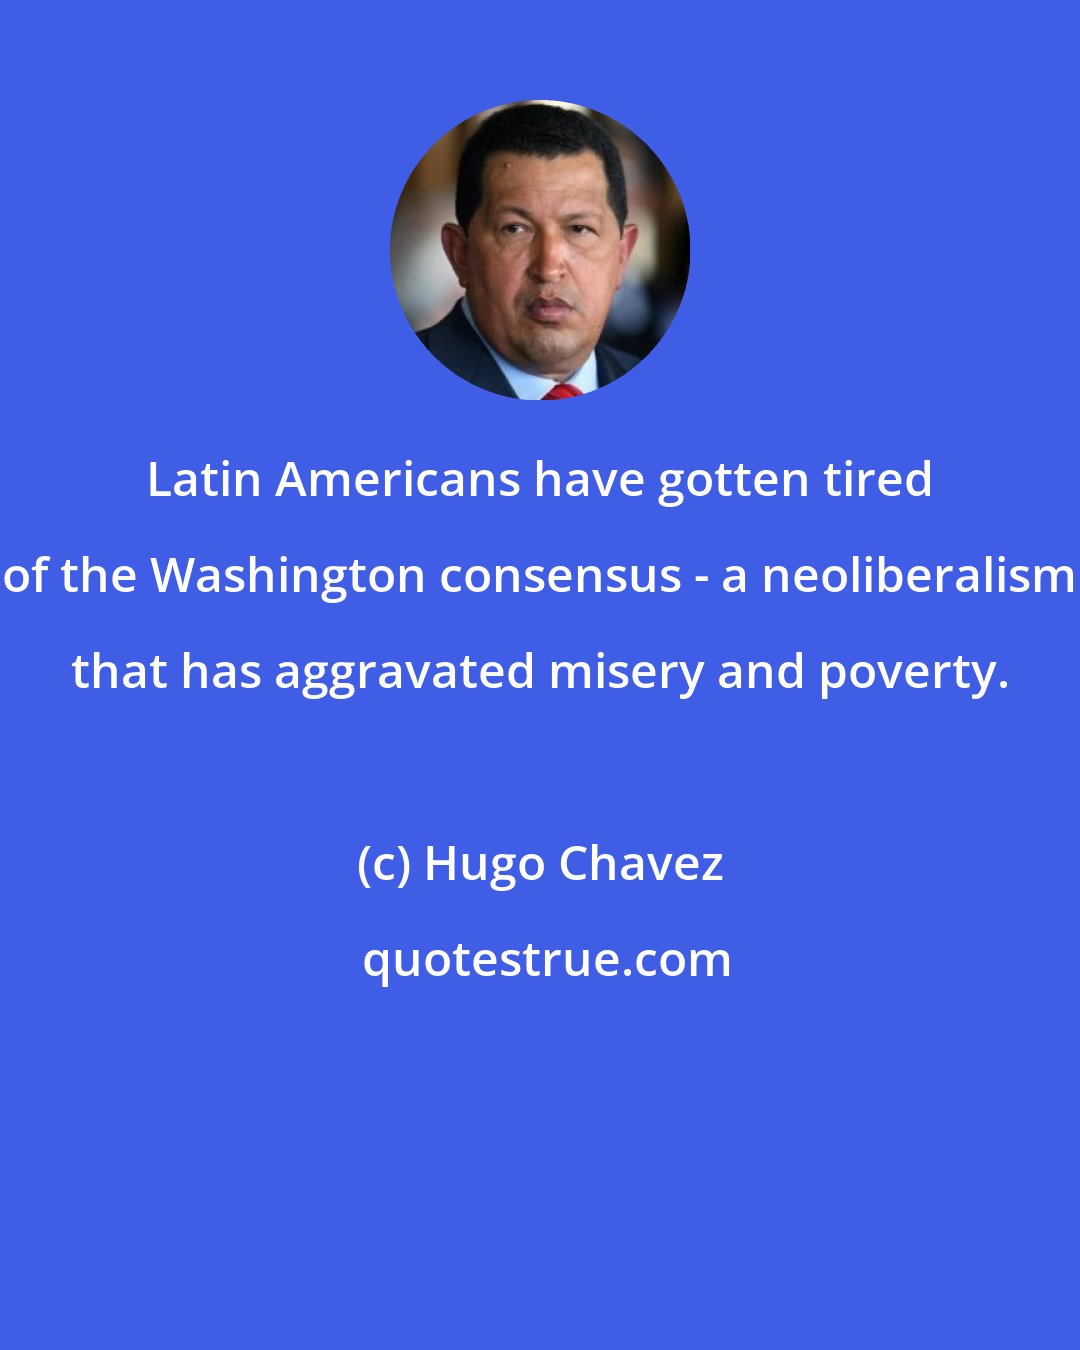 Hugo Chavez: Latin Americans have gotten tired of the Washington consensus - a neoliberalism that has aggravated misery and poverty.